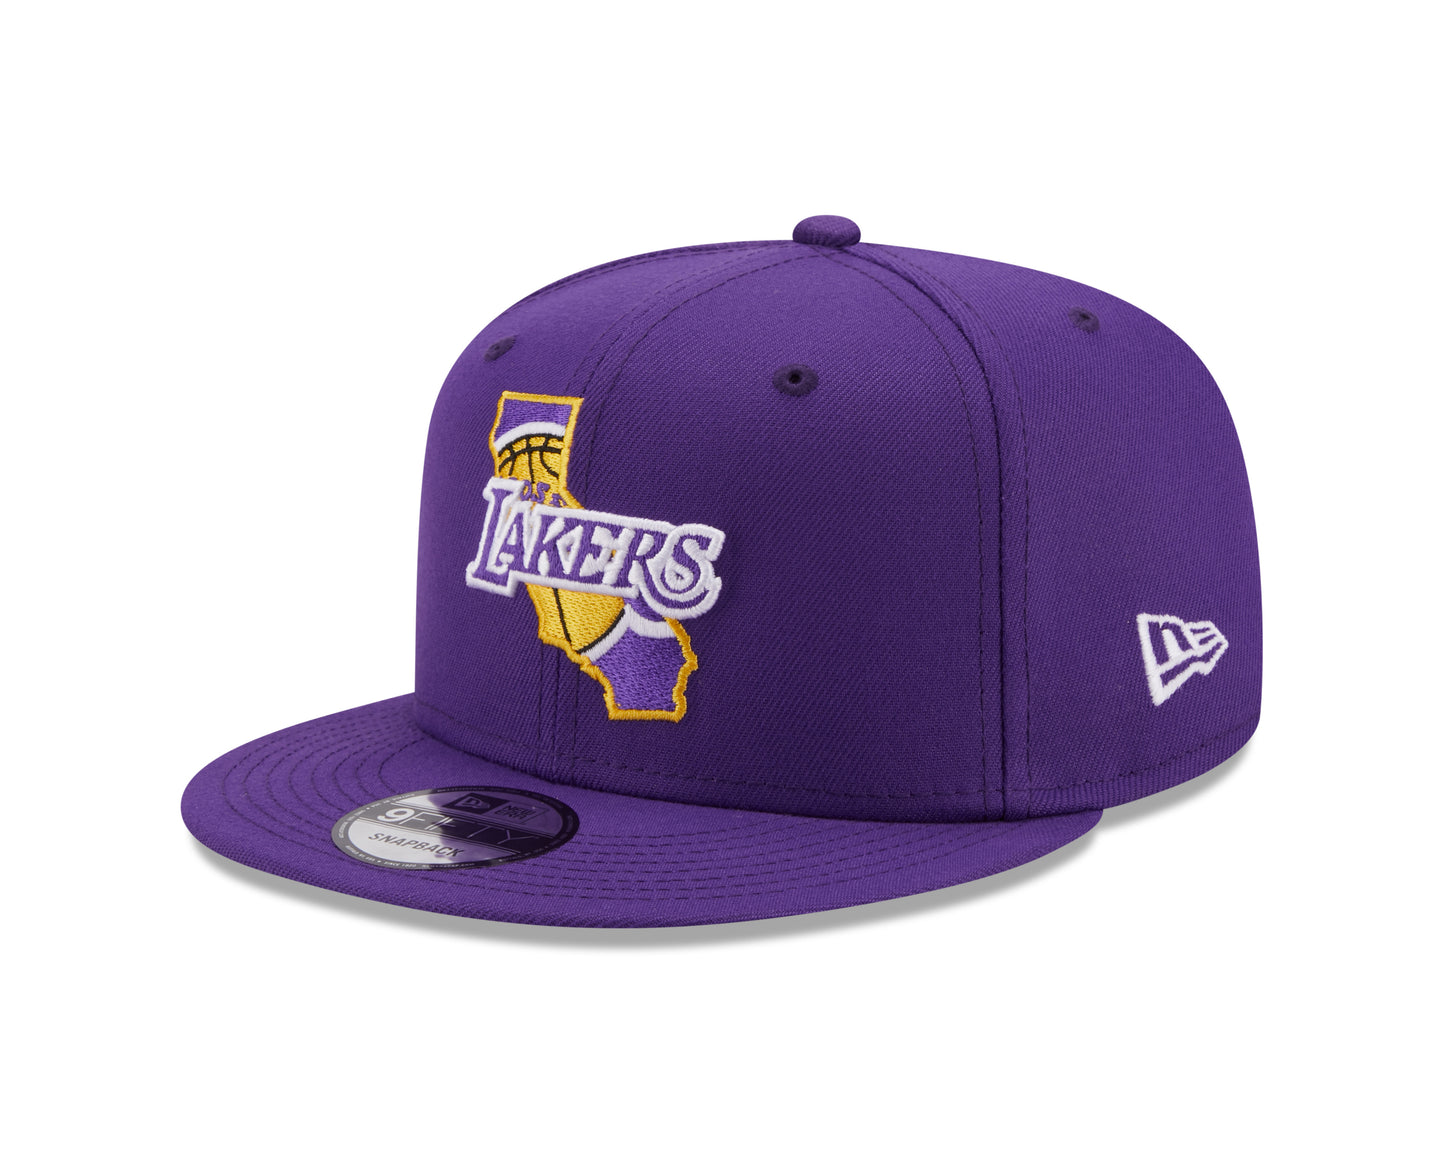 Los Angeles Lakers New Era Local Icon State 9FIFTY Adjustable Snapback Hat